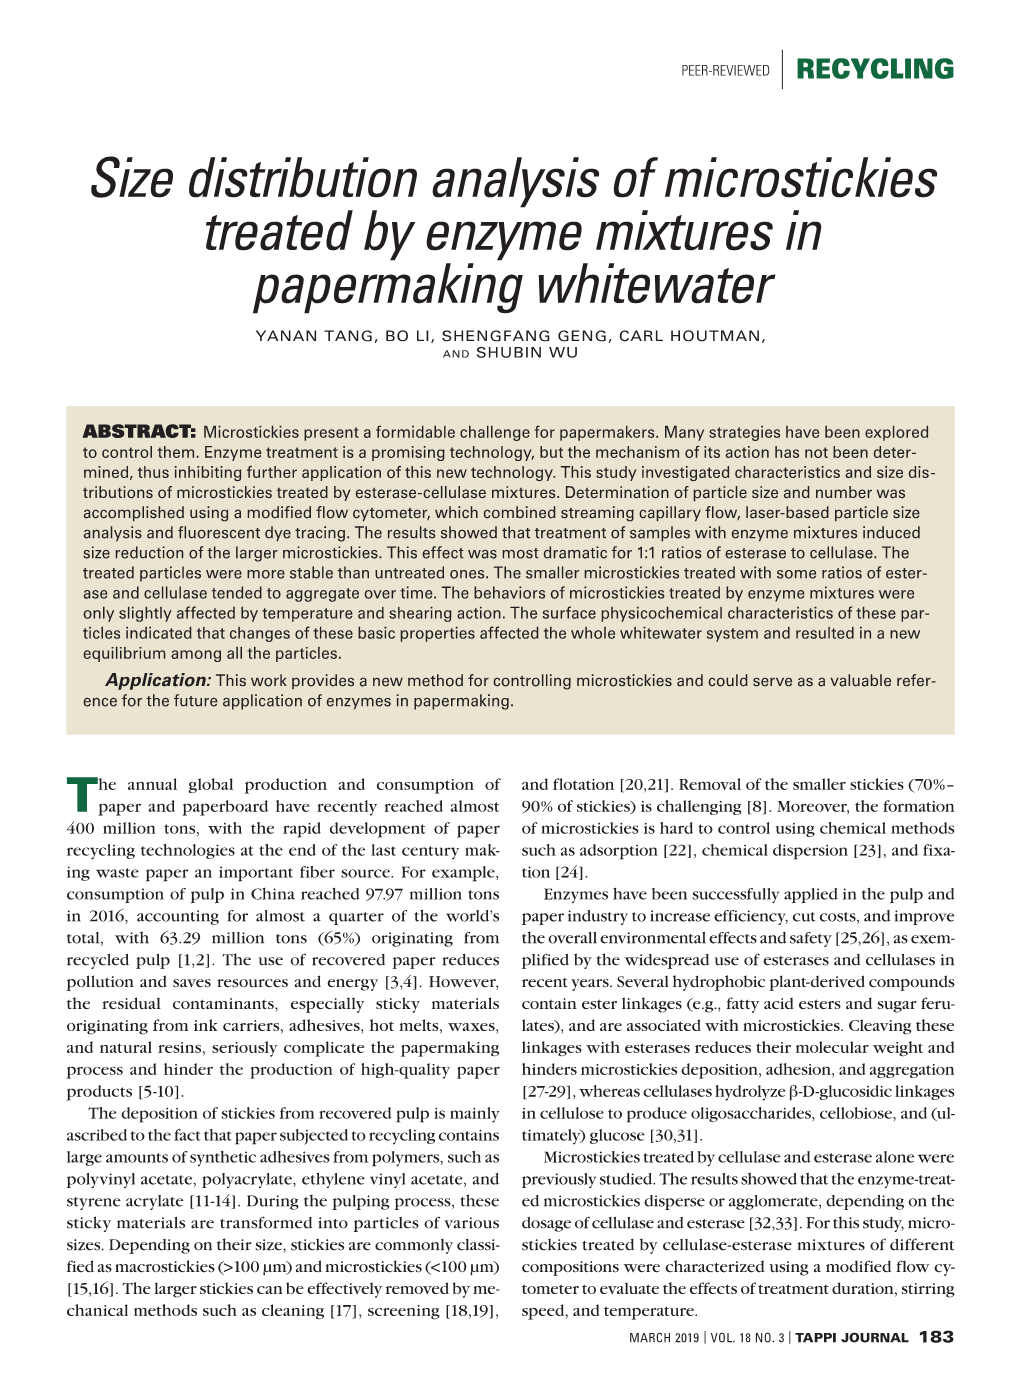 Size Distribution Analysis of Microstickies Treated by Enzyme Mixtures in Papermaking Whitewater YANAN TANG, BO LI, SHENGFANG GENG, CARL HOUTMAN, and SHUBIN WU